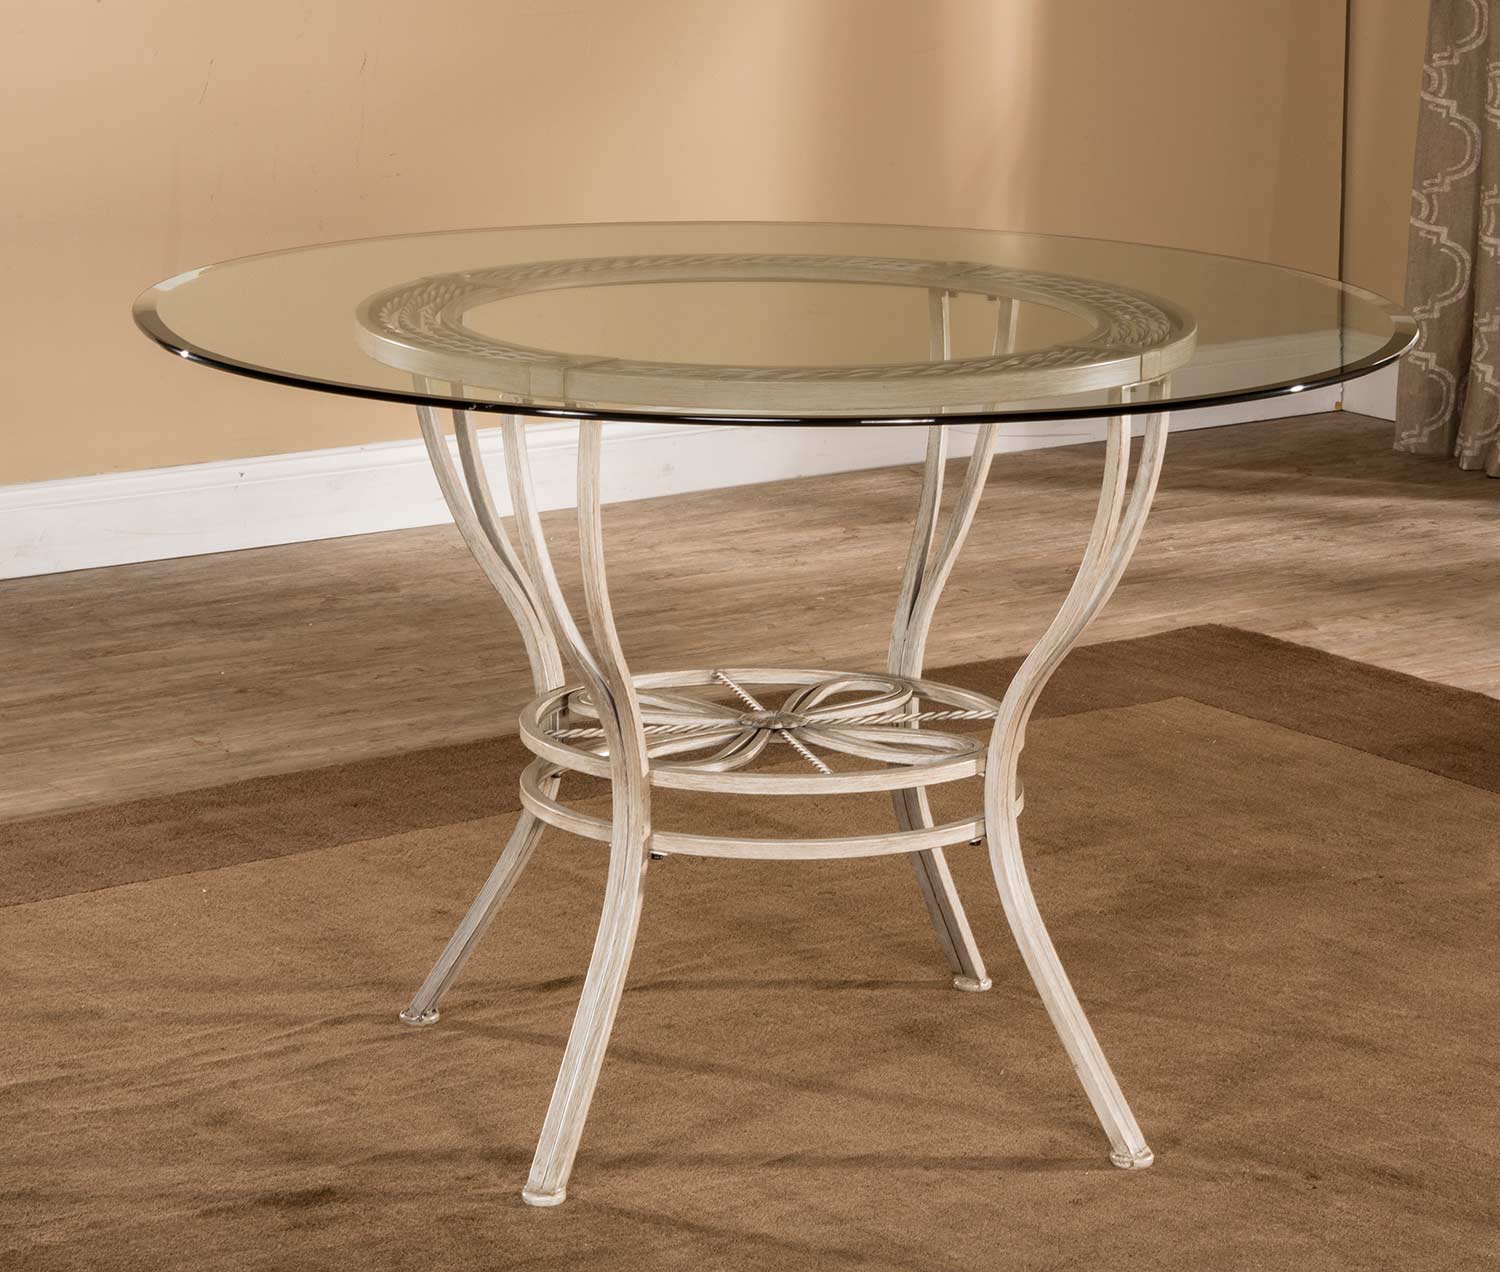 Hillsdale Napier Round Dining Table - Aged Ivory